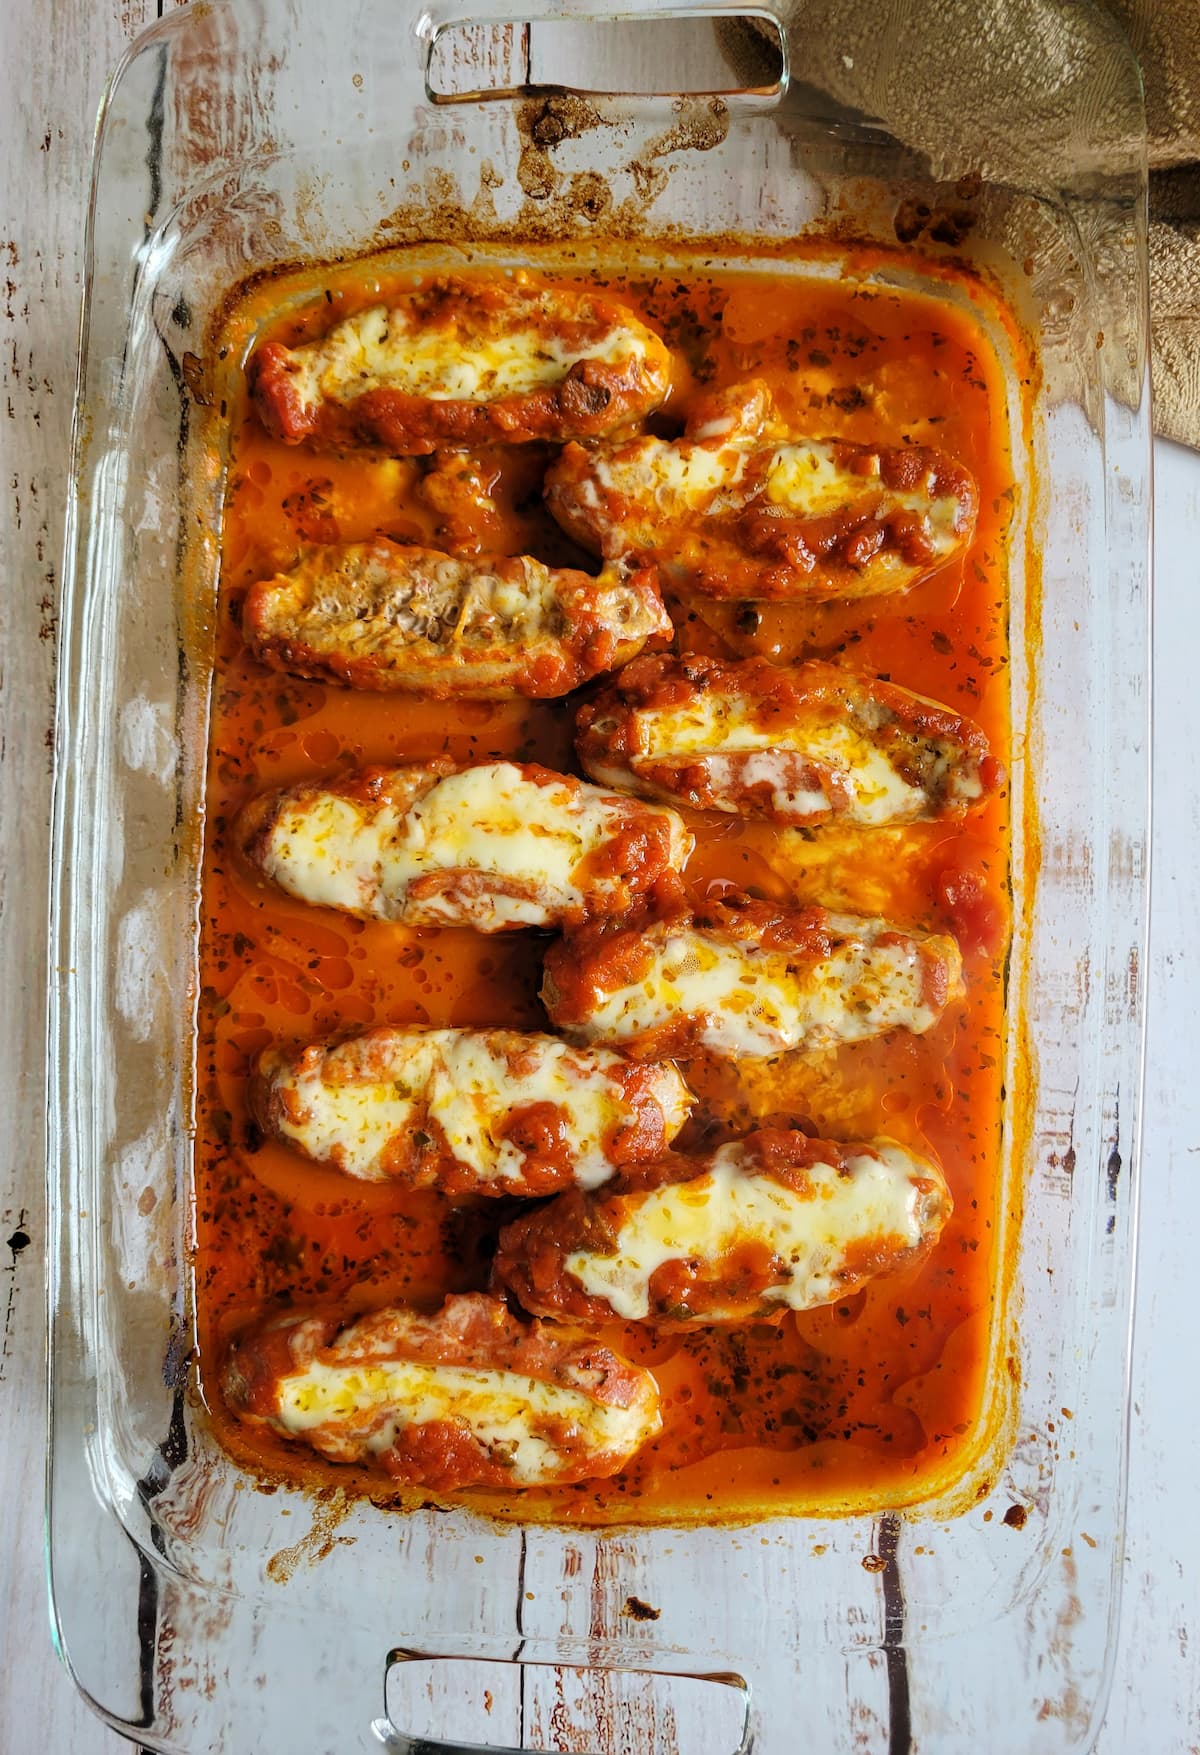 melted cheese stuffed sausages in tomato sauce